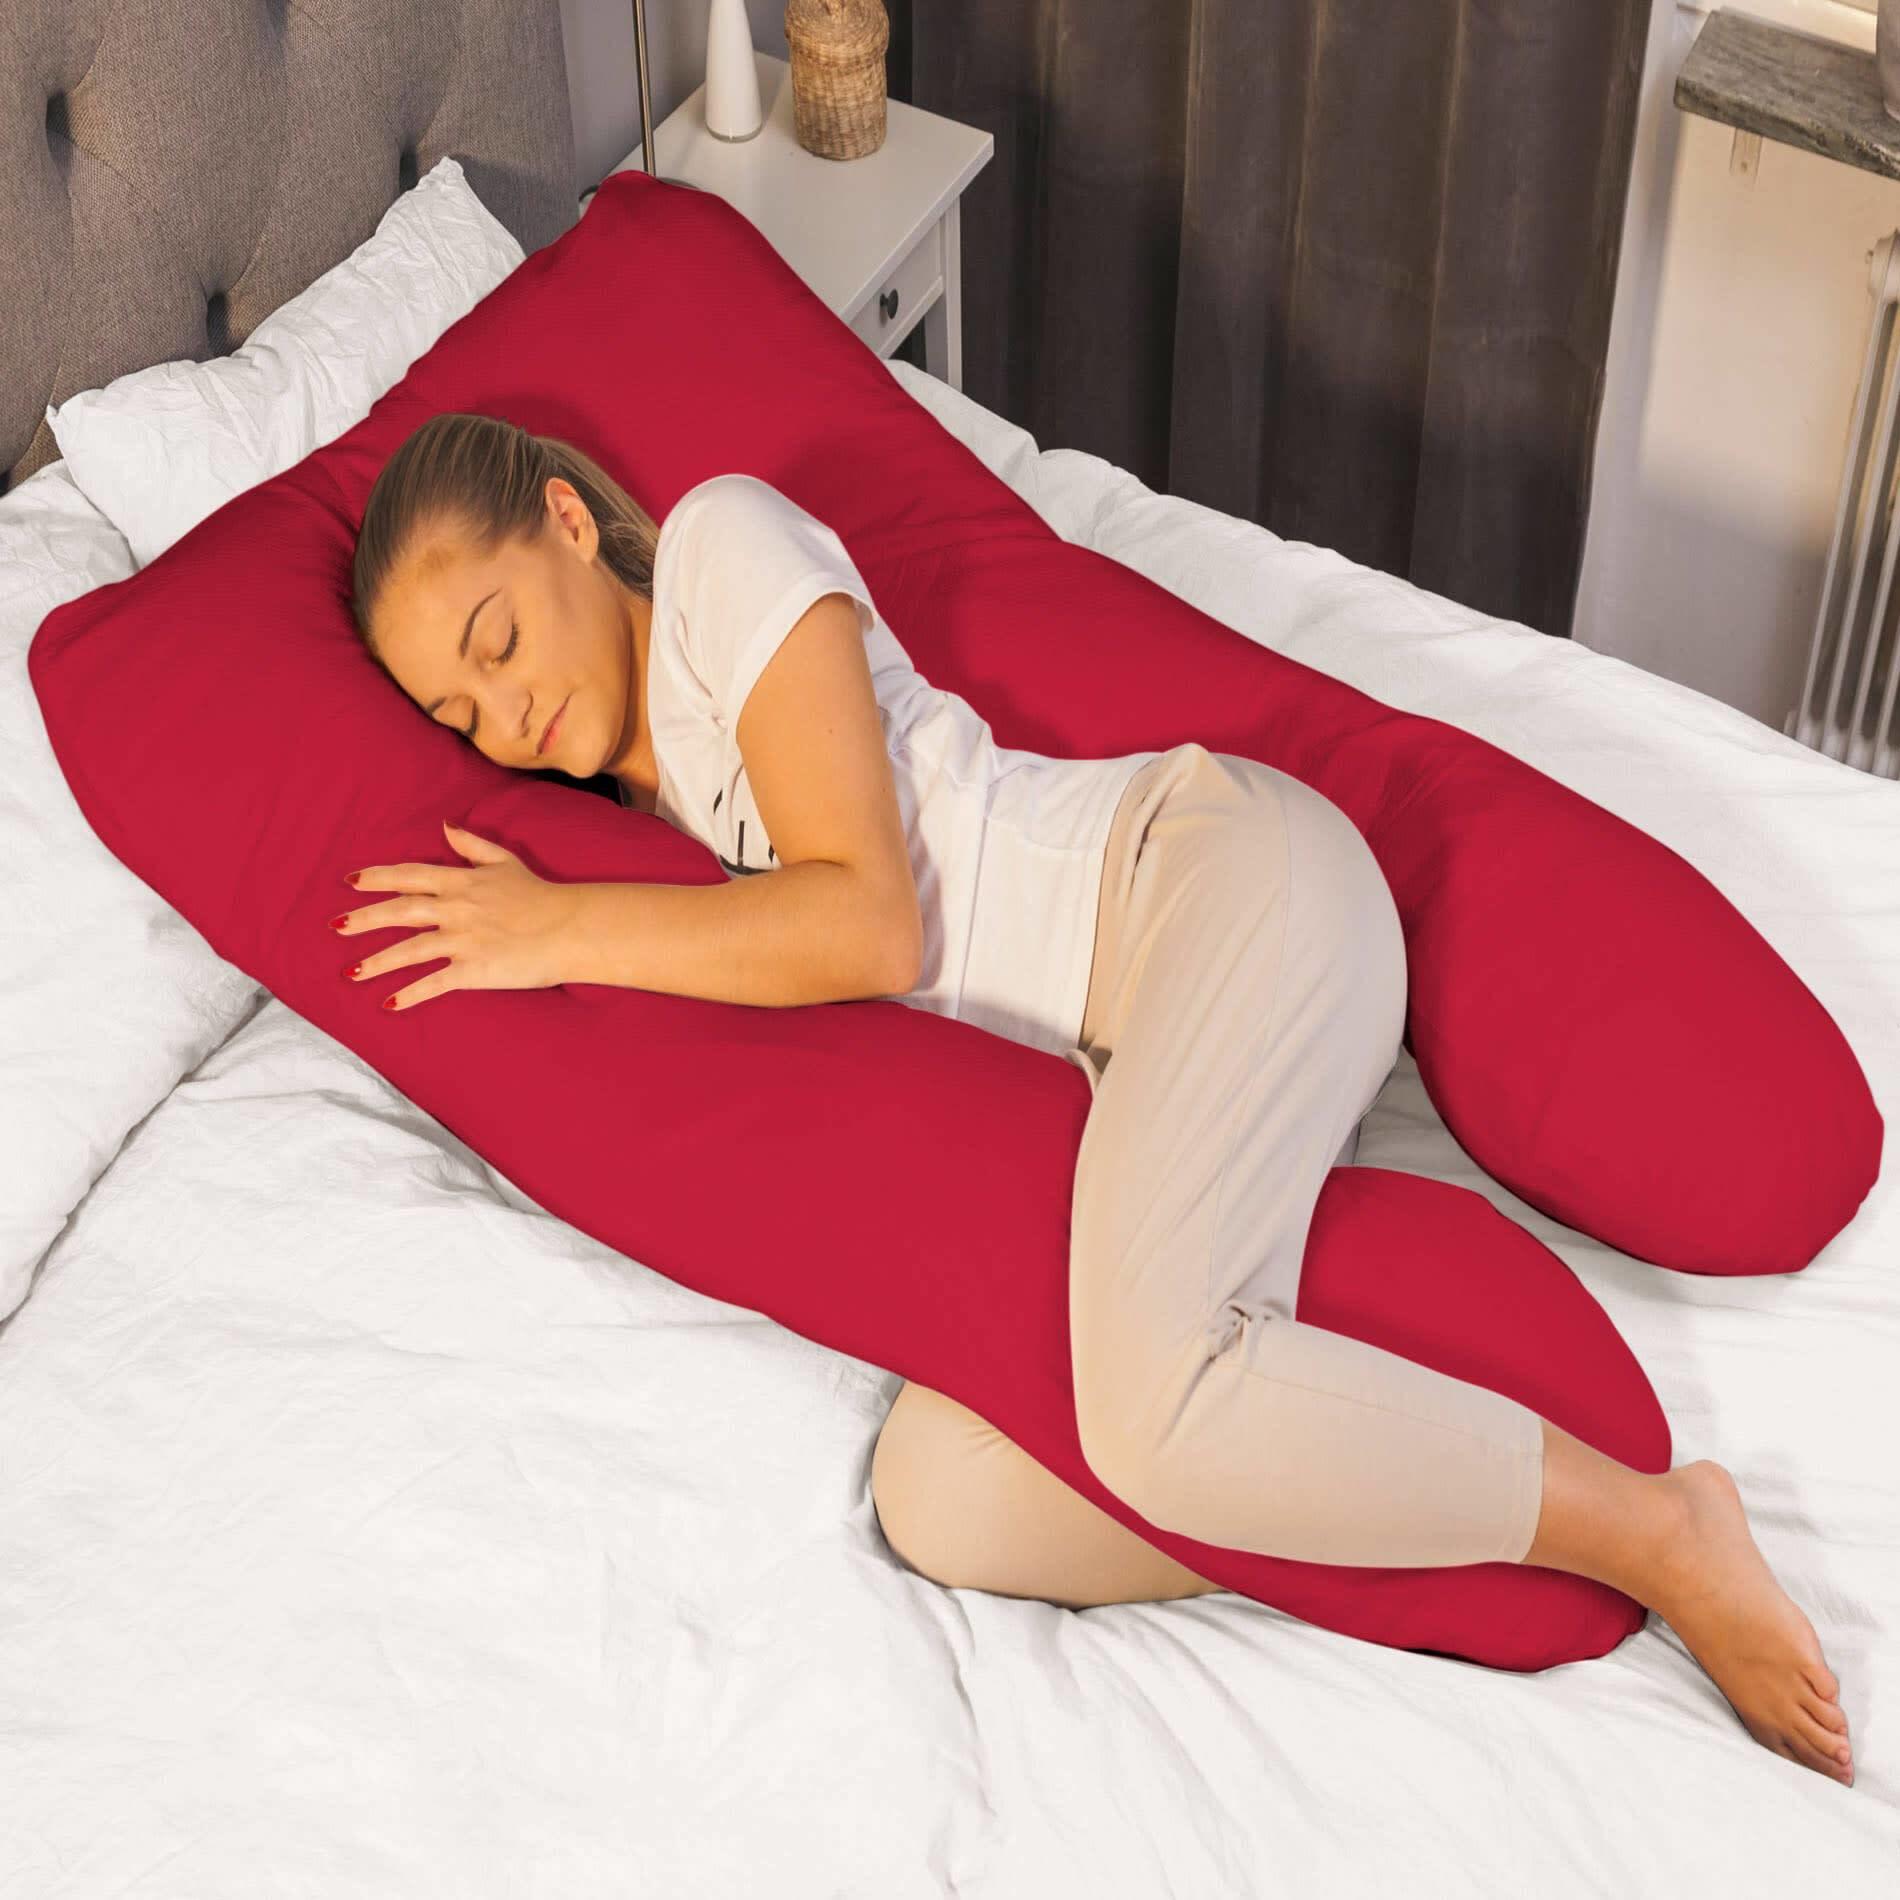 Hips Legs and Belly Polycotton Fabric Filled with 100% Polyester Hollowfibre Comfortable Support for Back 9 FT LONG U Shape PILLOW Maternity Support Full Body Length Back and Bump Support 